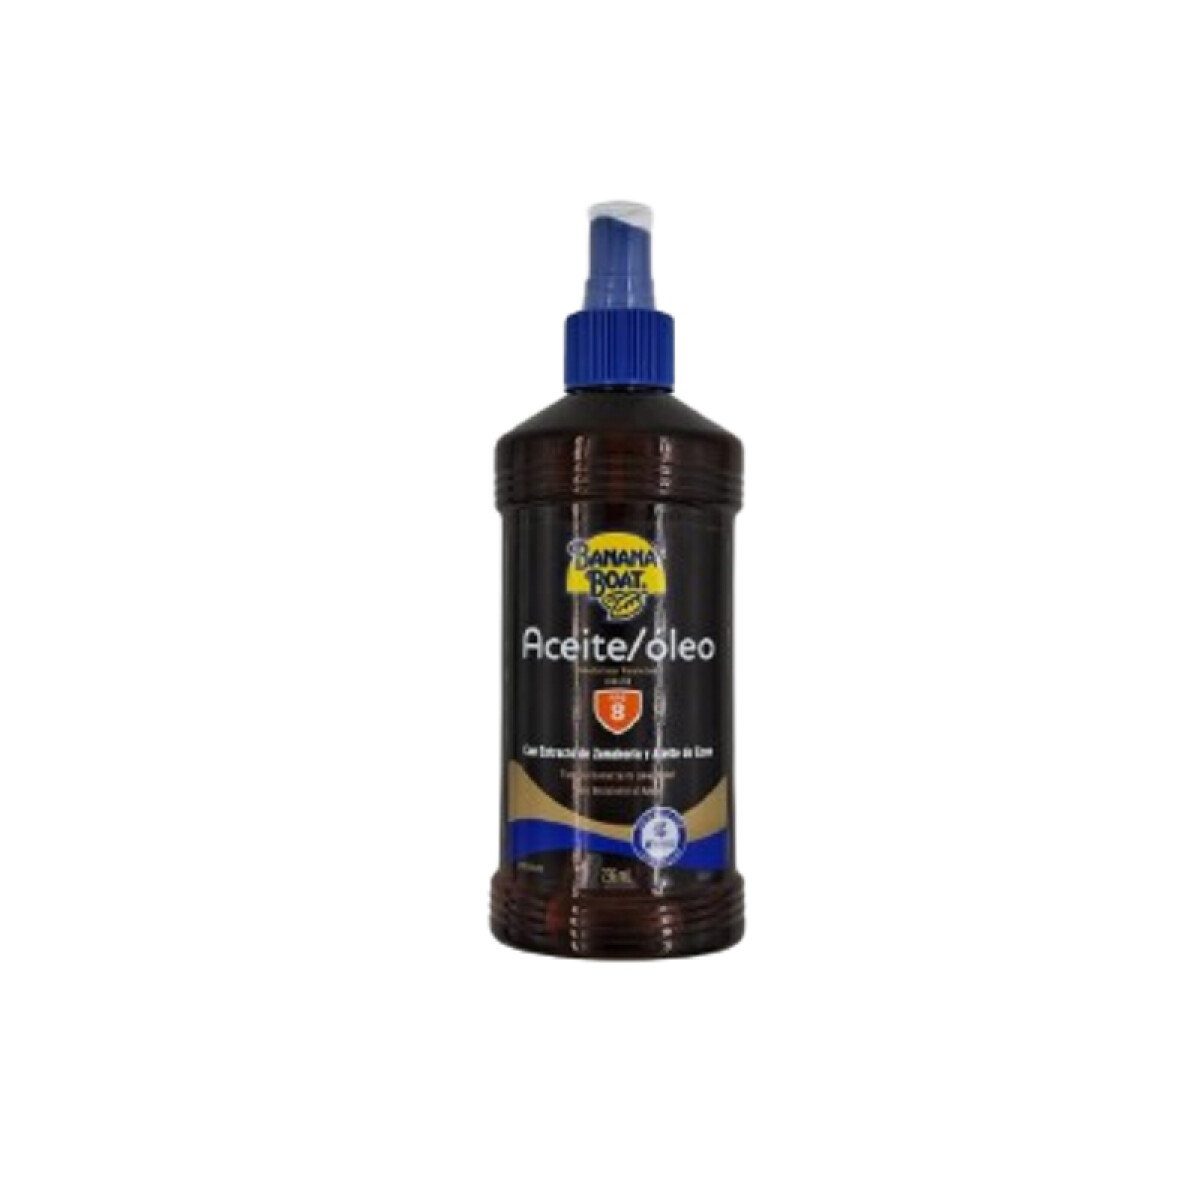 Protector solar Banana Boat - Gold aceite fps 8 